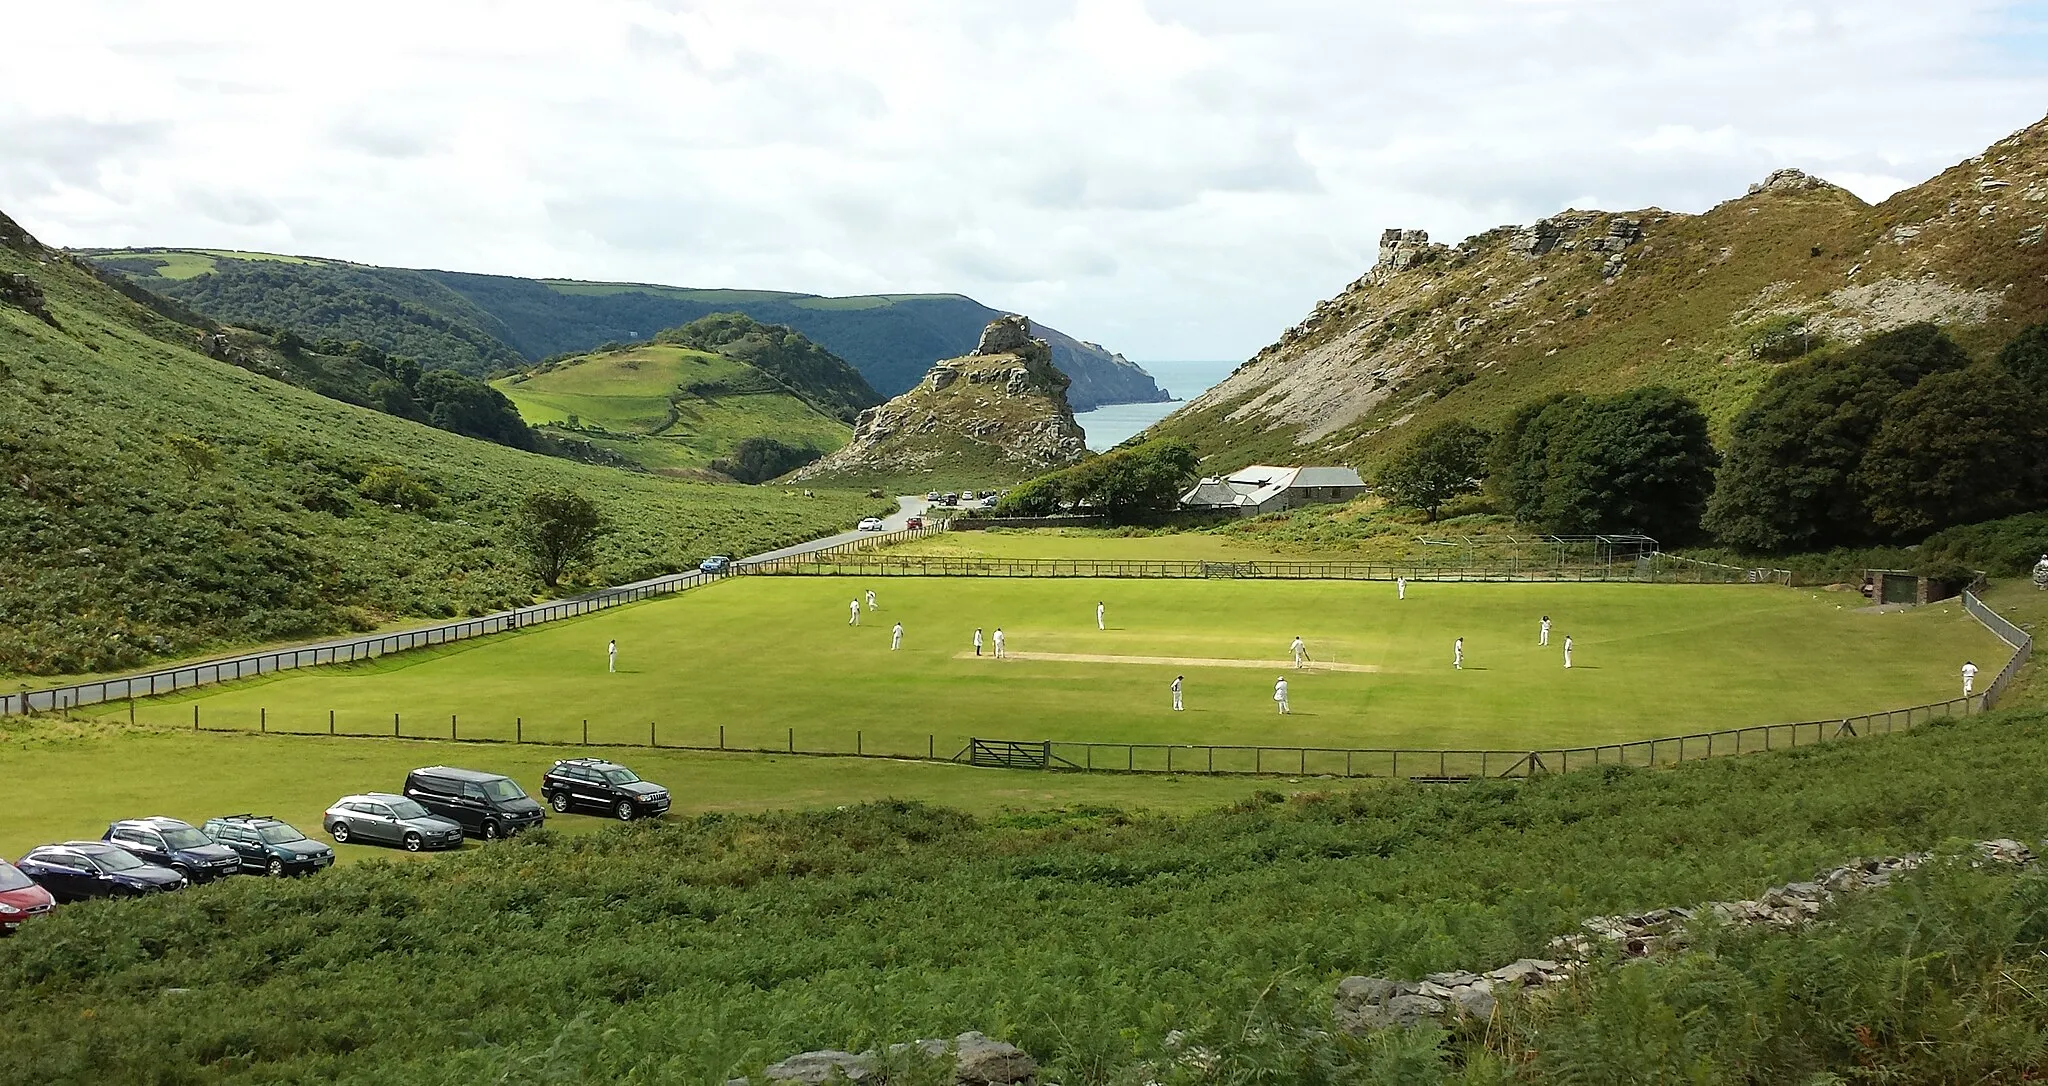 Photo showing: A cricket match in progress on the Lynton and Lynmouth cricket ground in the Valley of the Rocks